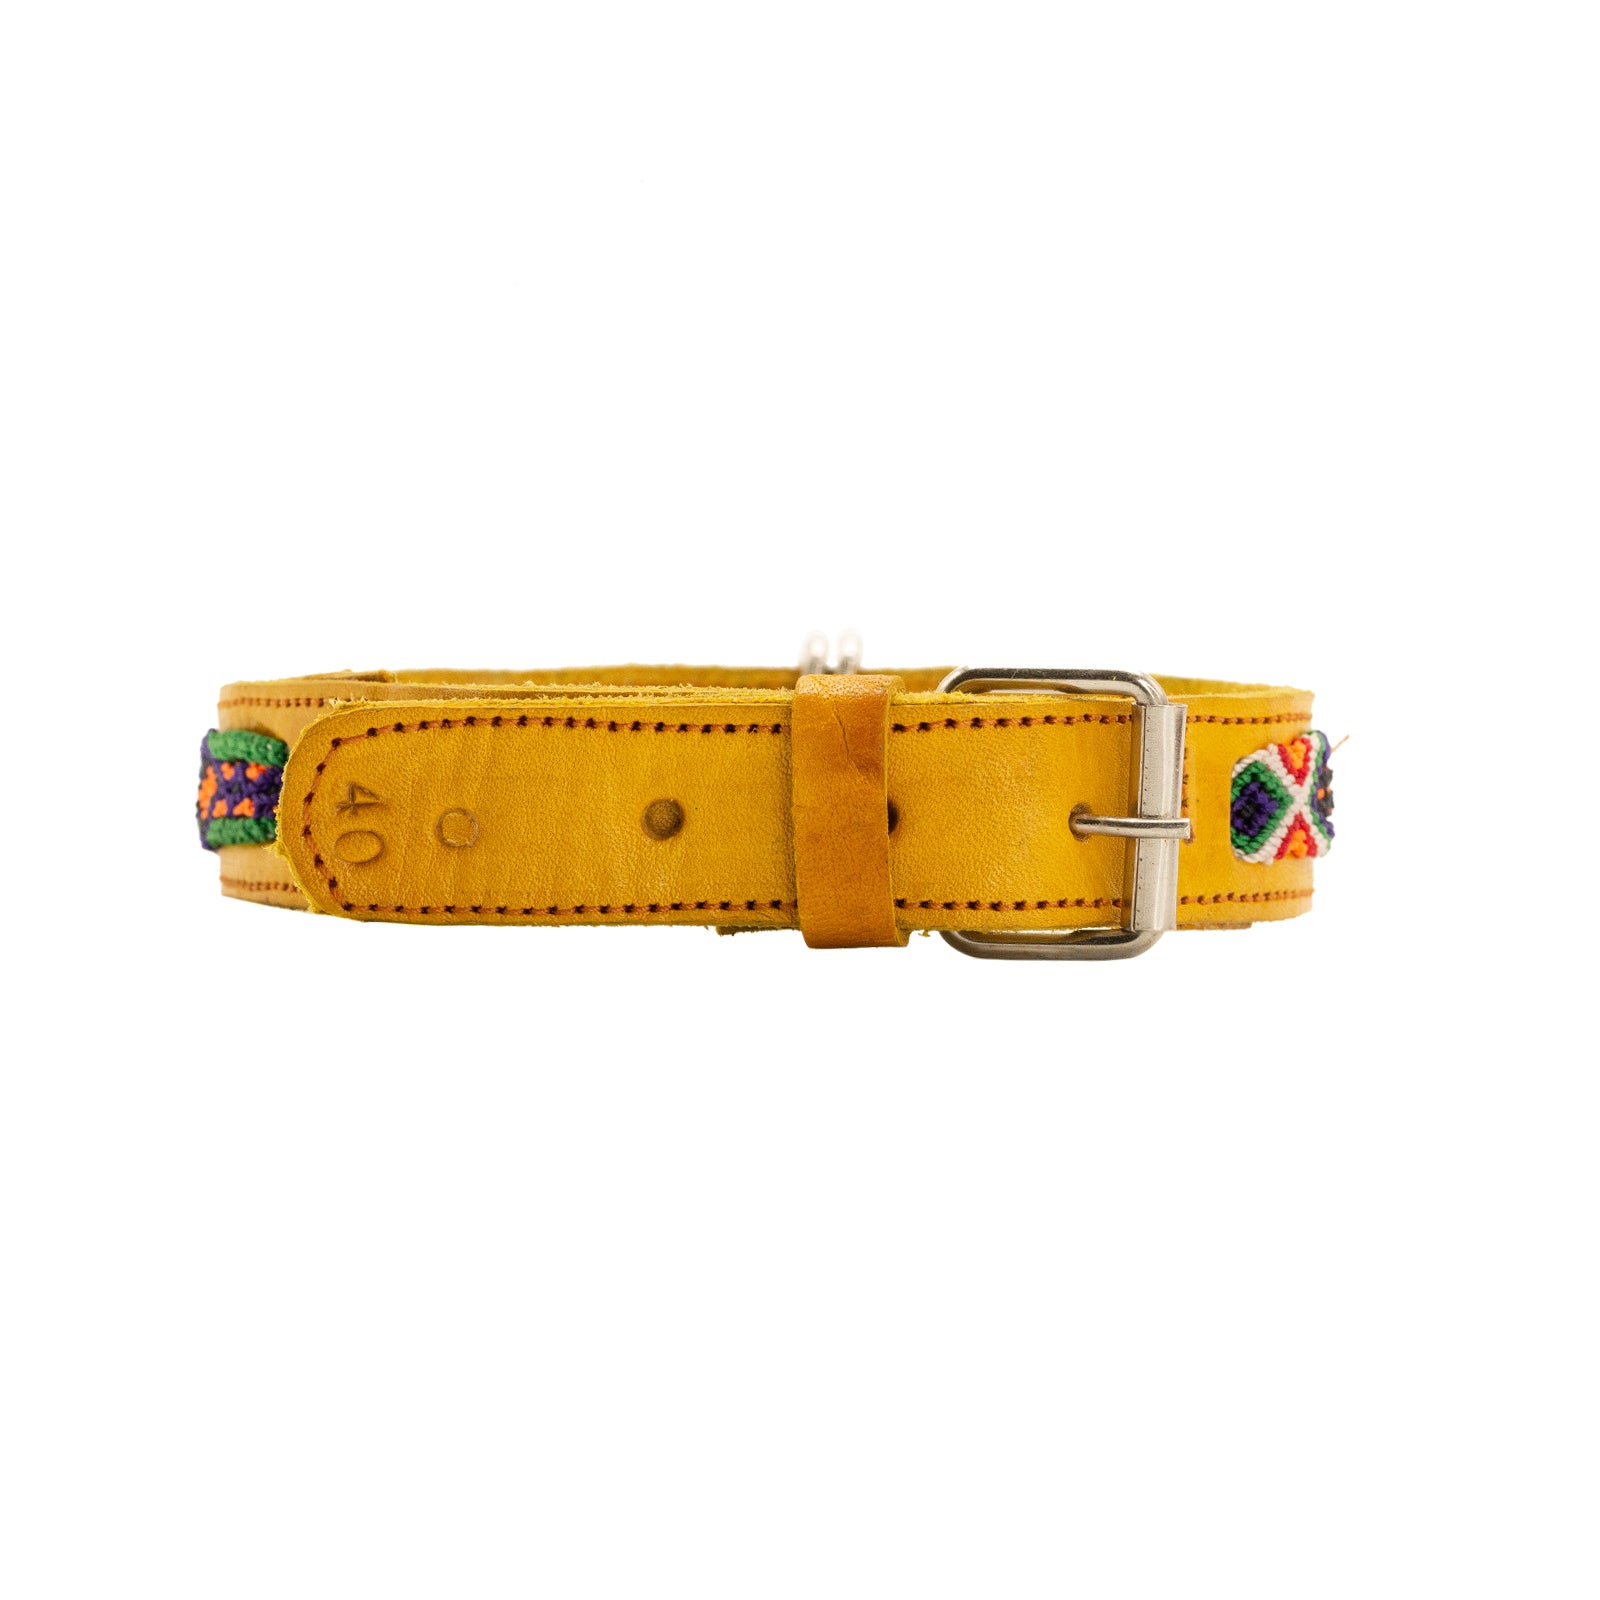 Premium leather collar for pets embellished with handwoven silk thread